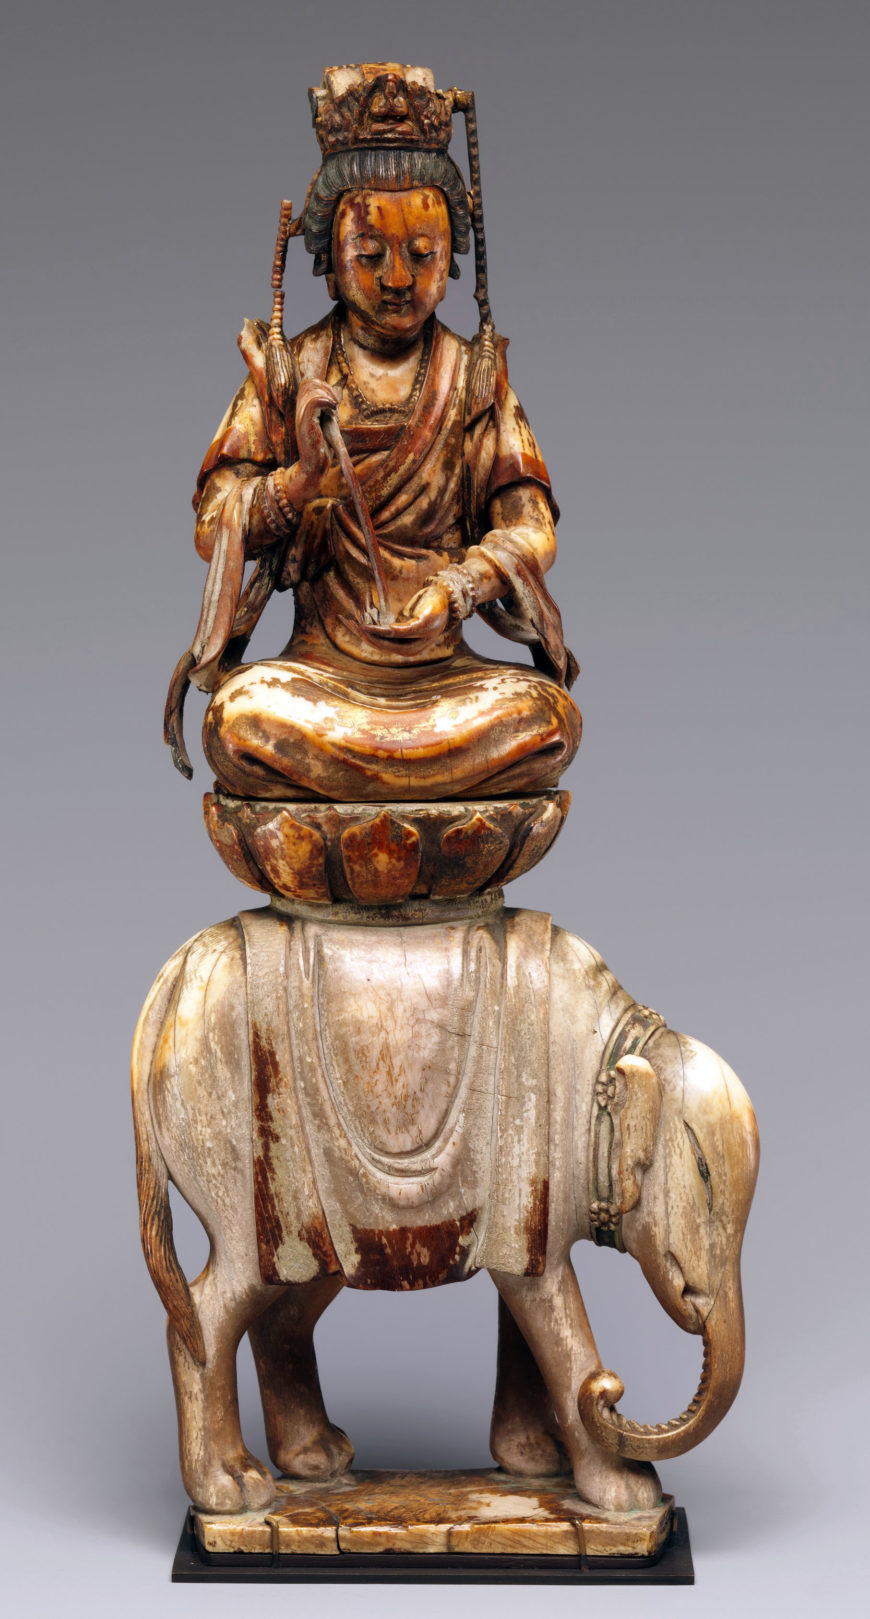 Bodhisattva Samantabhadra (Puxian). 12th-14th century. Southern Song to Yuan dynasty, mammoth ivory, China, 22.2 cm high (The Metropolitan Museum of Art)